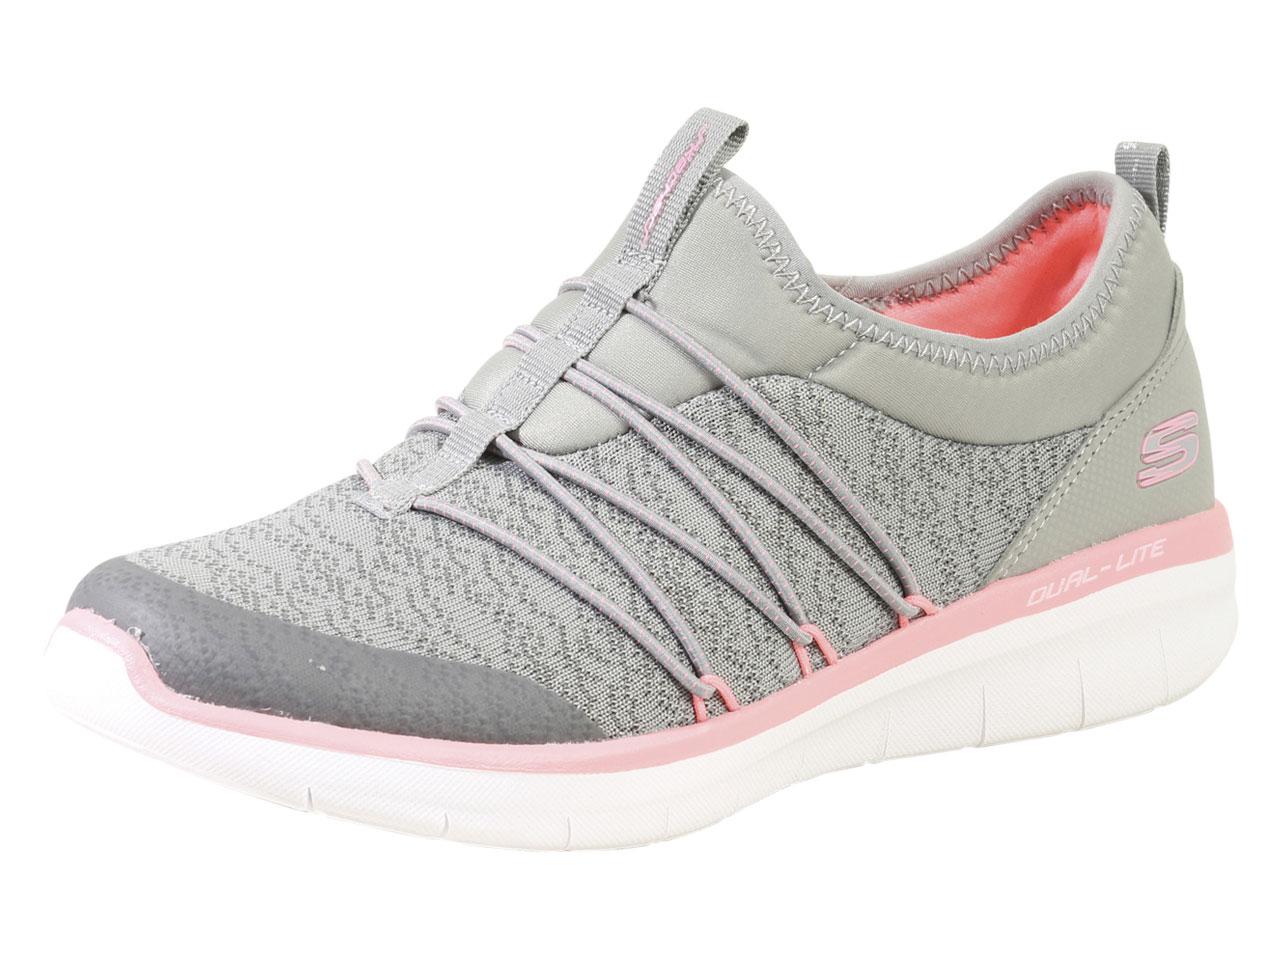 Skechers Women's Synergy 2.0 Simply Chic Memory Foam Sneakers Shoes - Gray/Pink - 8 B(M) US